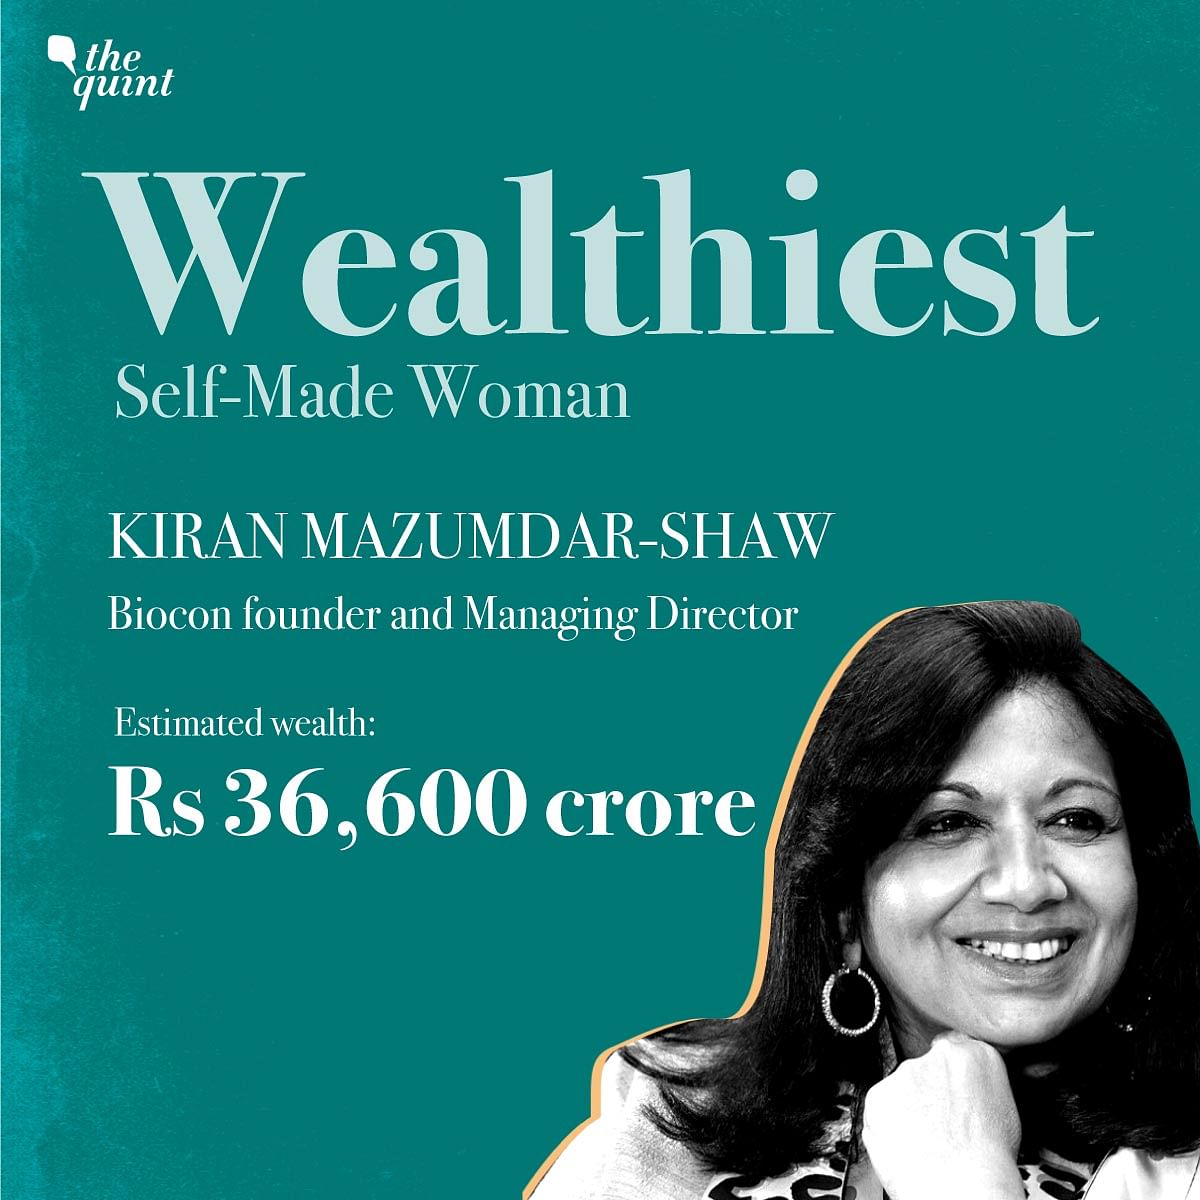 The average wealth of women on this list is about Rs 2,725 crore and the threshold for the ranking is Rs 100 crore.